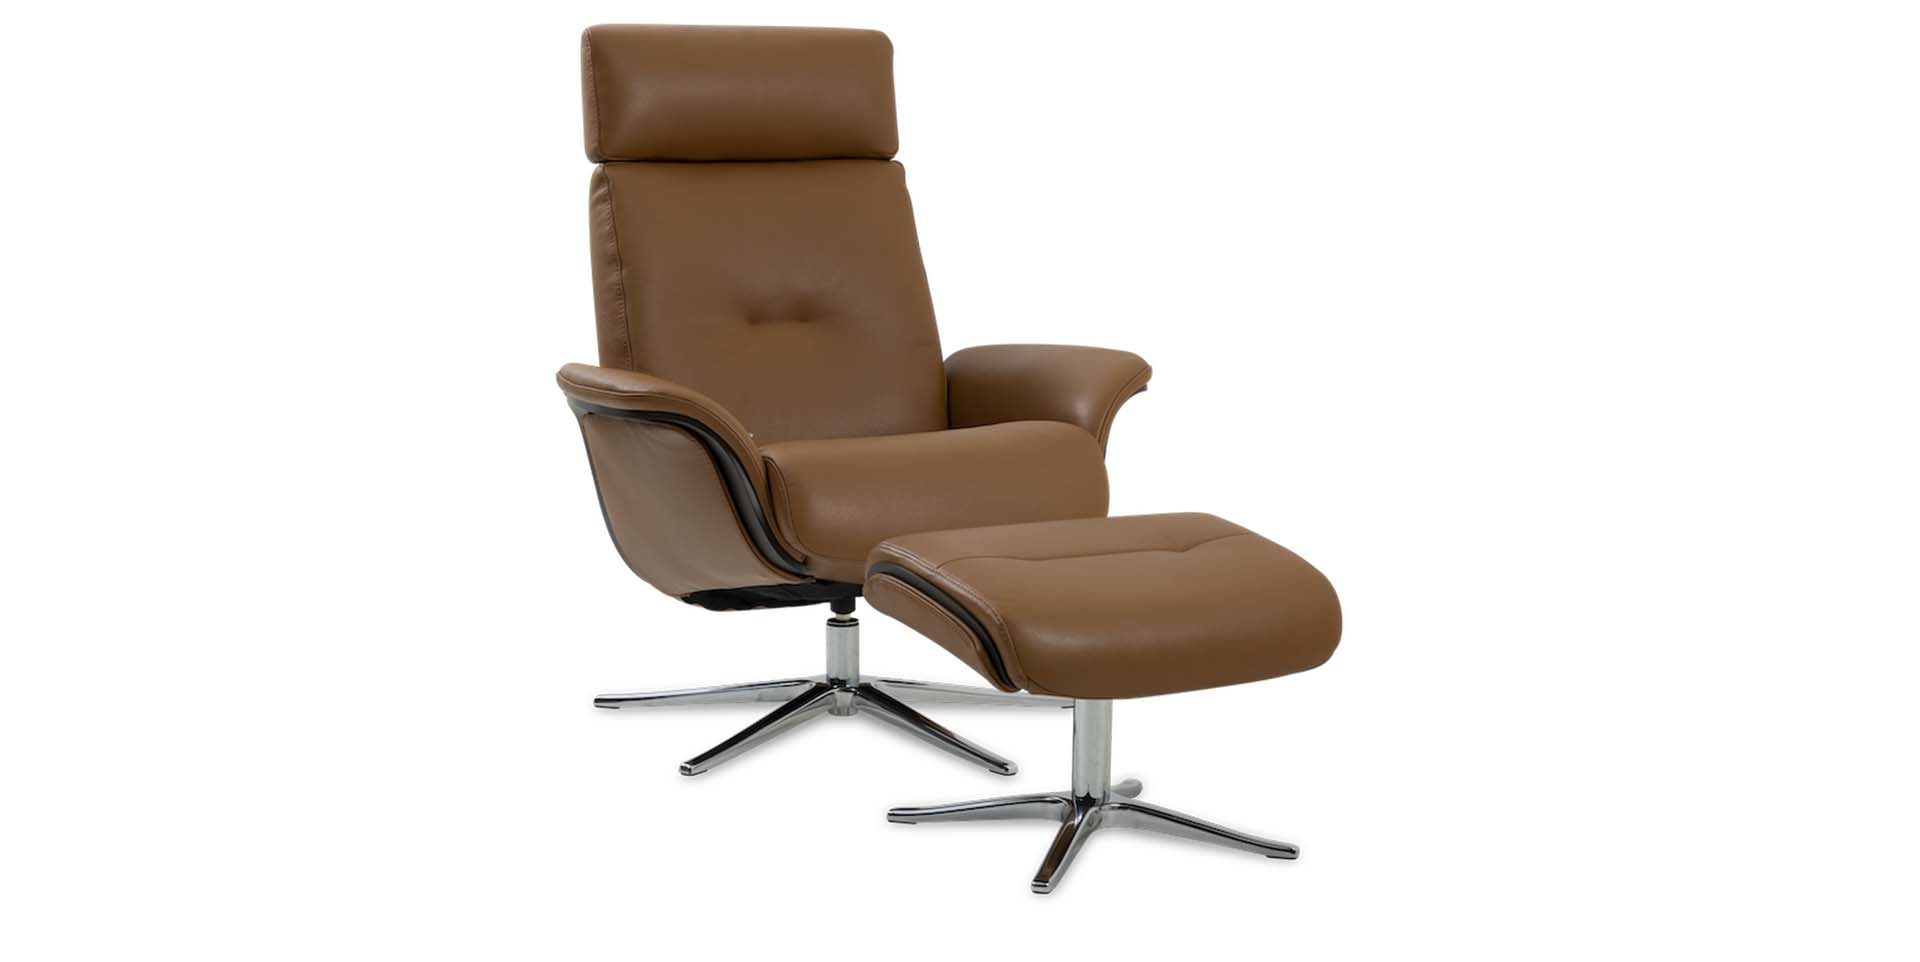 Slider Fauteuil relaxation SPACE 5000 (image 4)